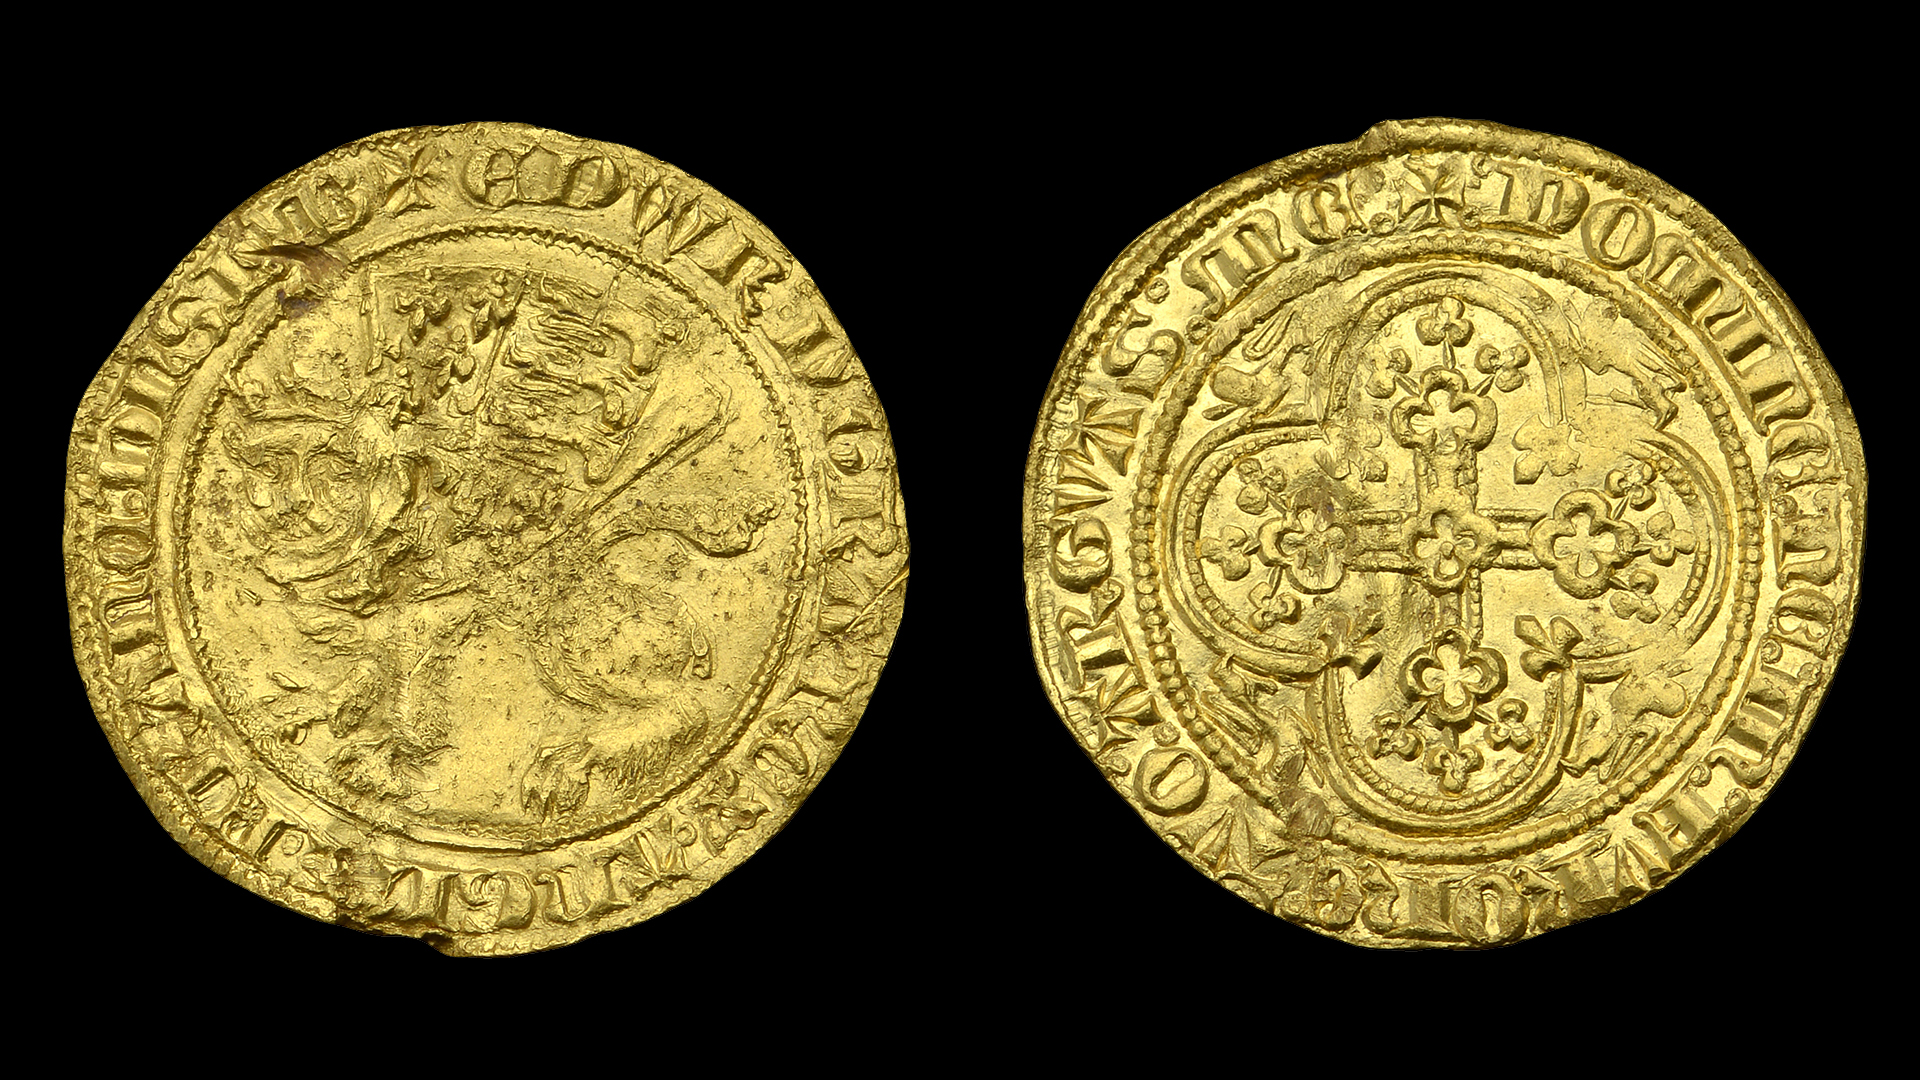 Leopard coins were withdrawn from English currency in 1344.